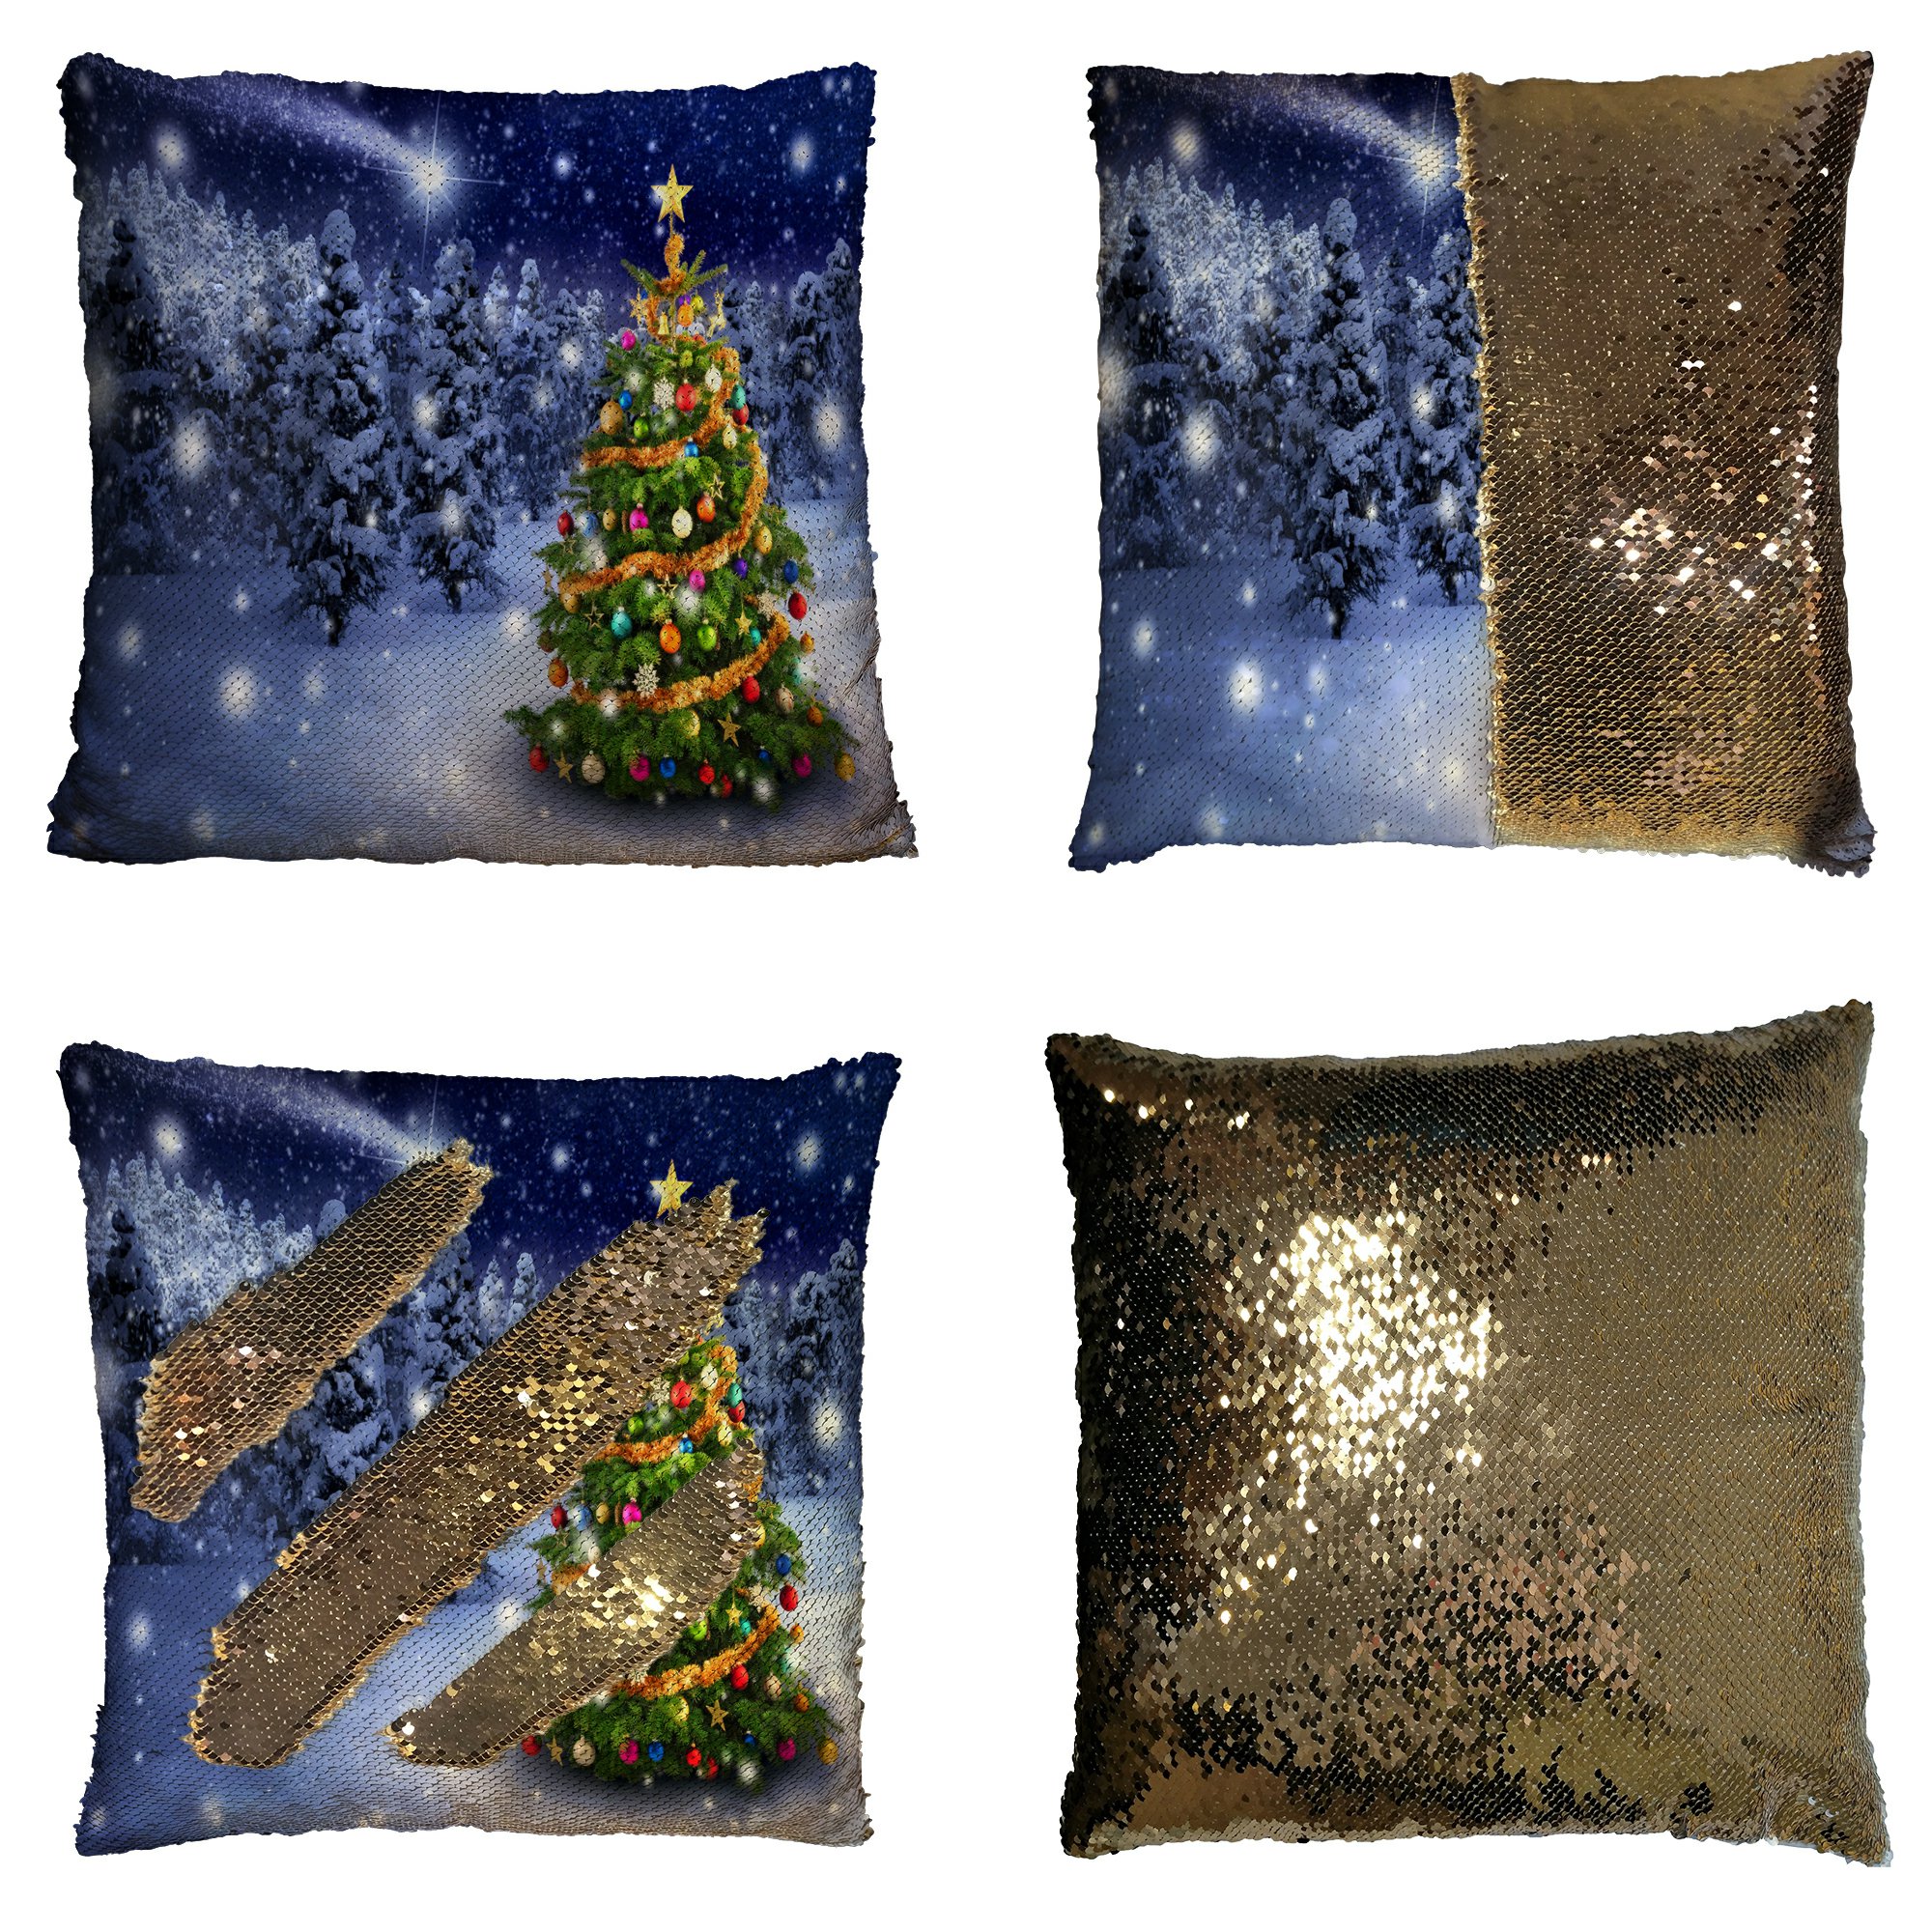 GCKG Snow Tree Scenery Pillowcase, Colorful Merry Christmas Tree with Holiday Presents Reversible Mermaid Sequin Pillow Case Home Decor Cushion Cover 16x16 inches - image 1 of 3